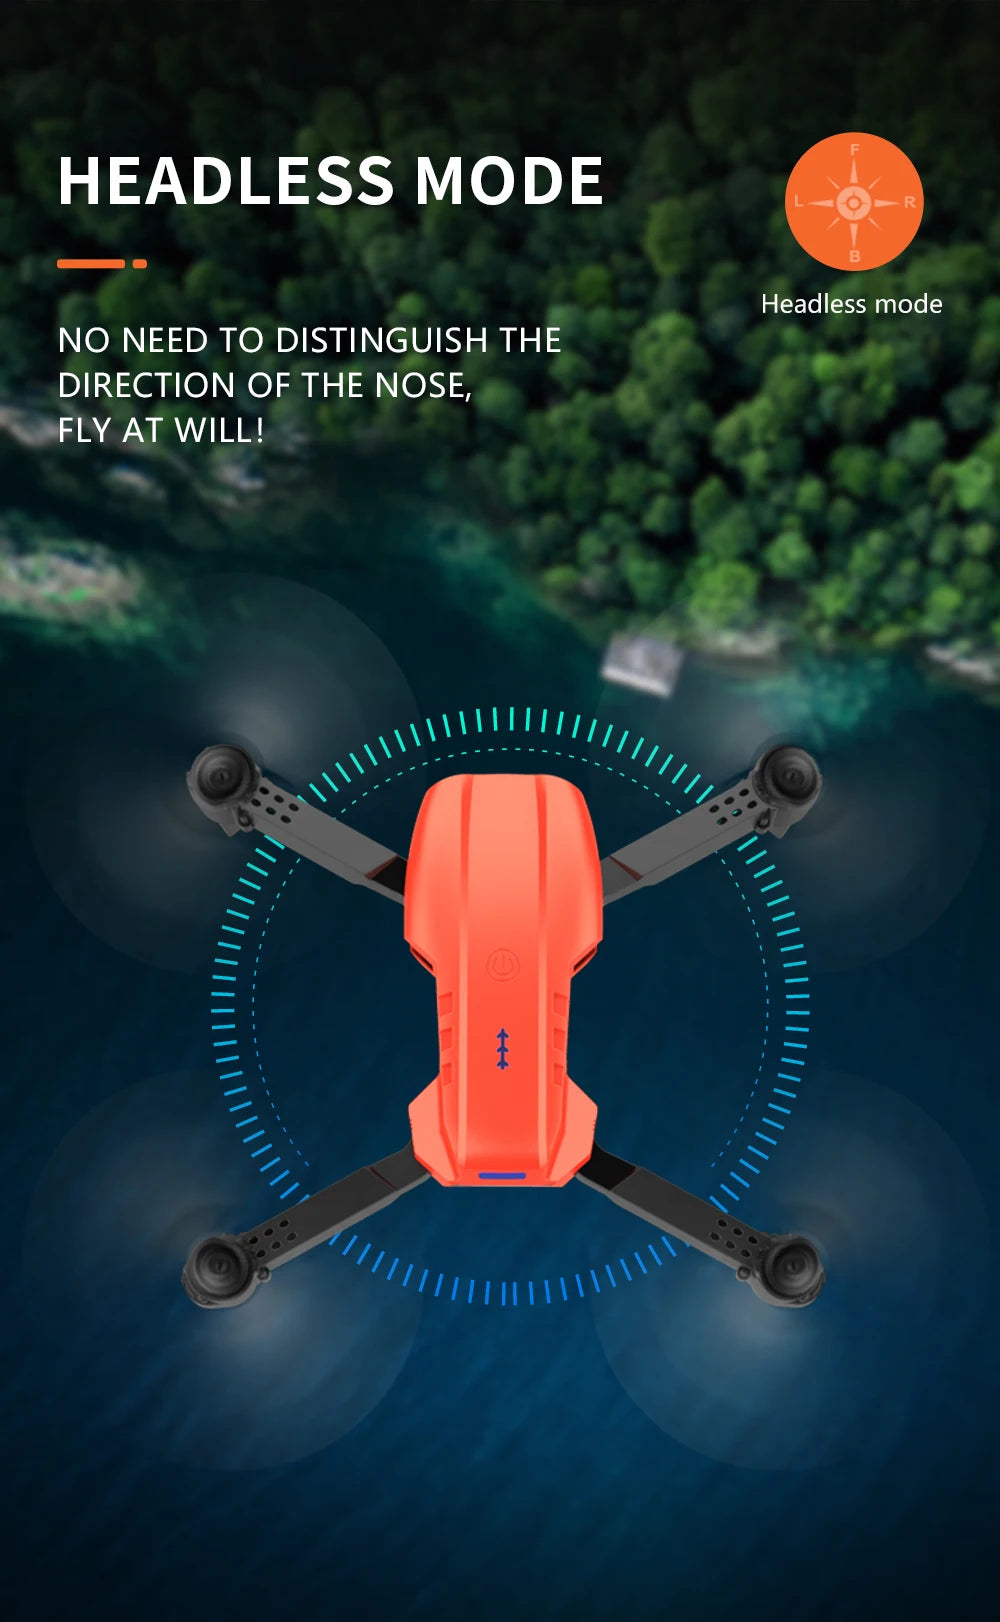 XYRC K3 Mini Drone, headless mode no need to distinguish the direction of the nose, fly